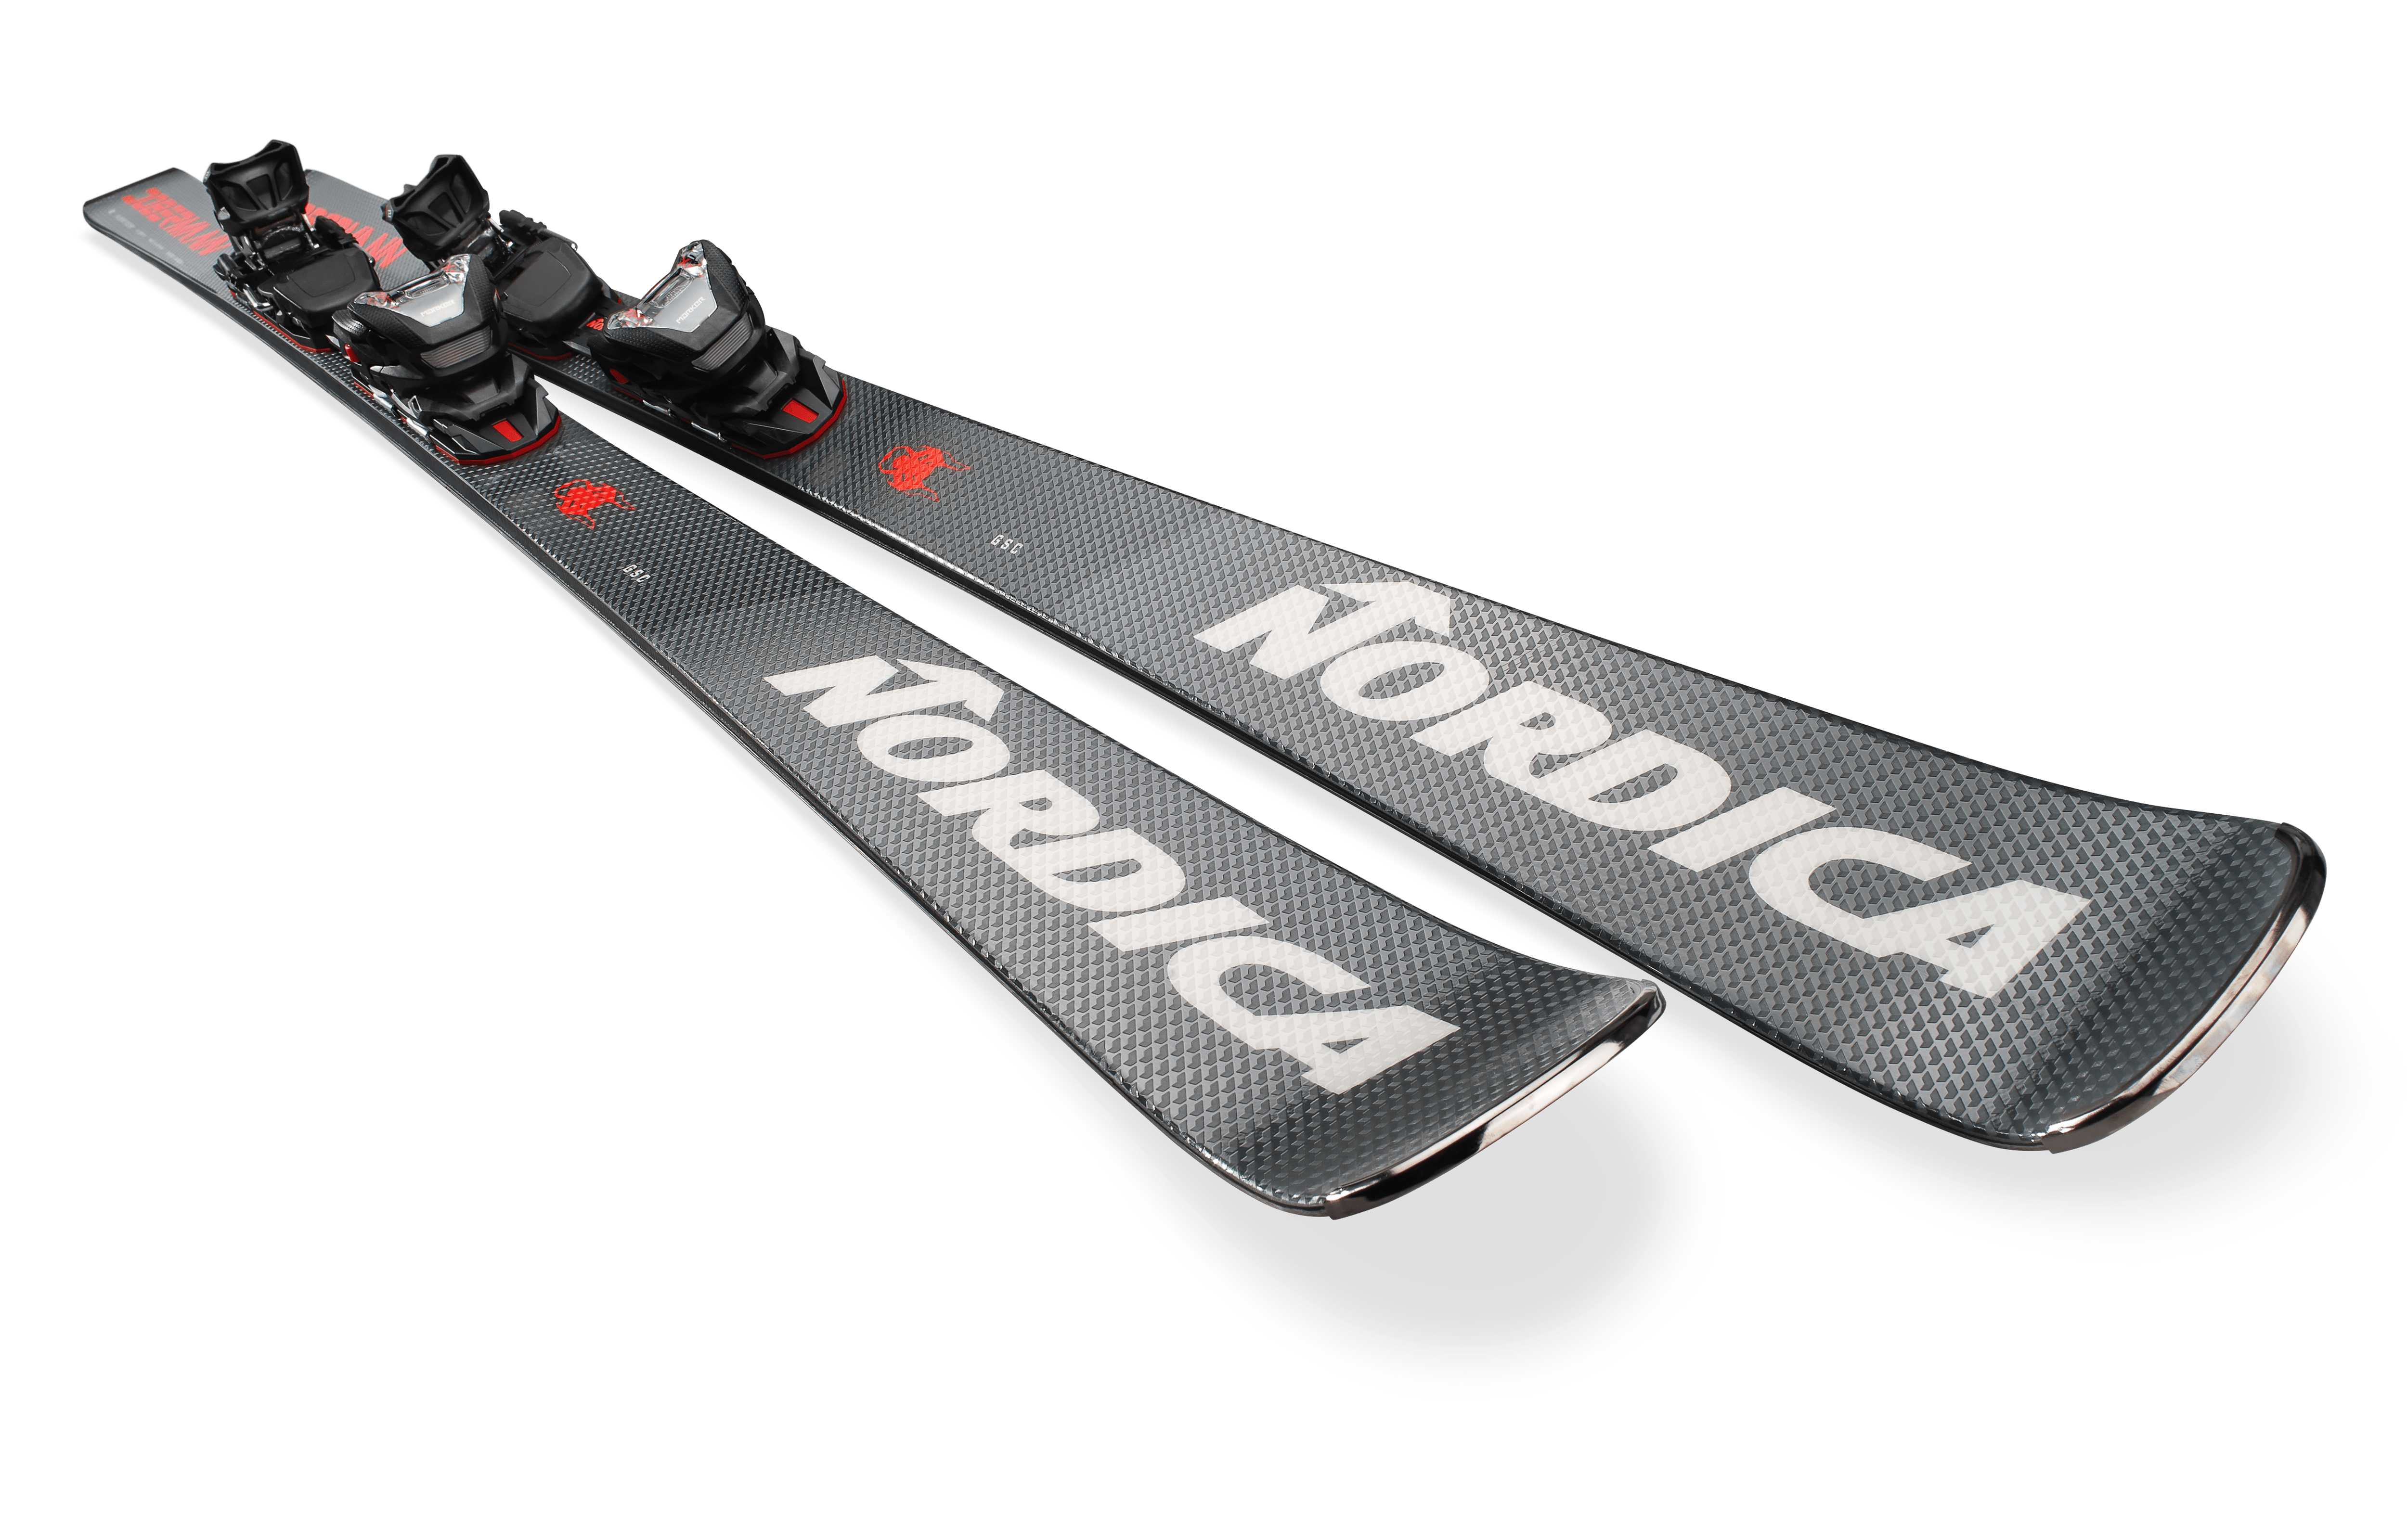 Picture of the Nordica Dobermann gsc fdt skis.